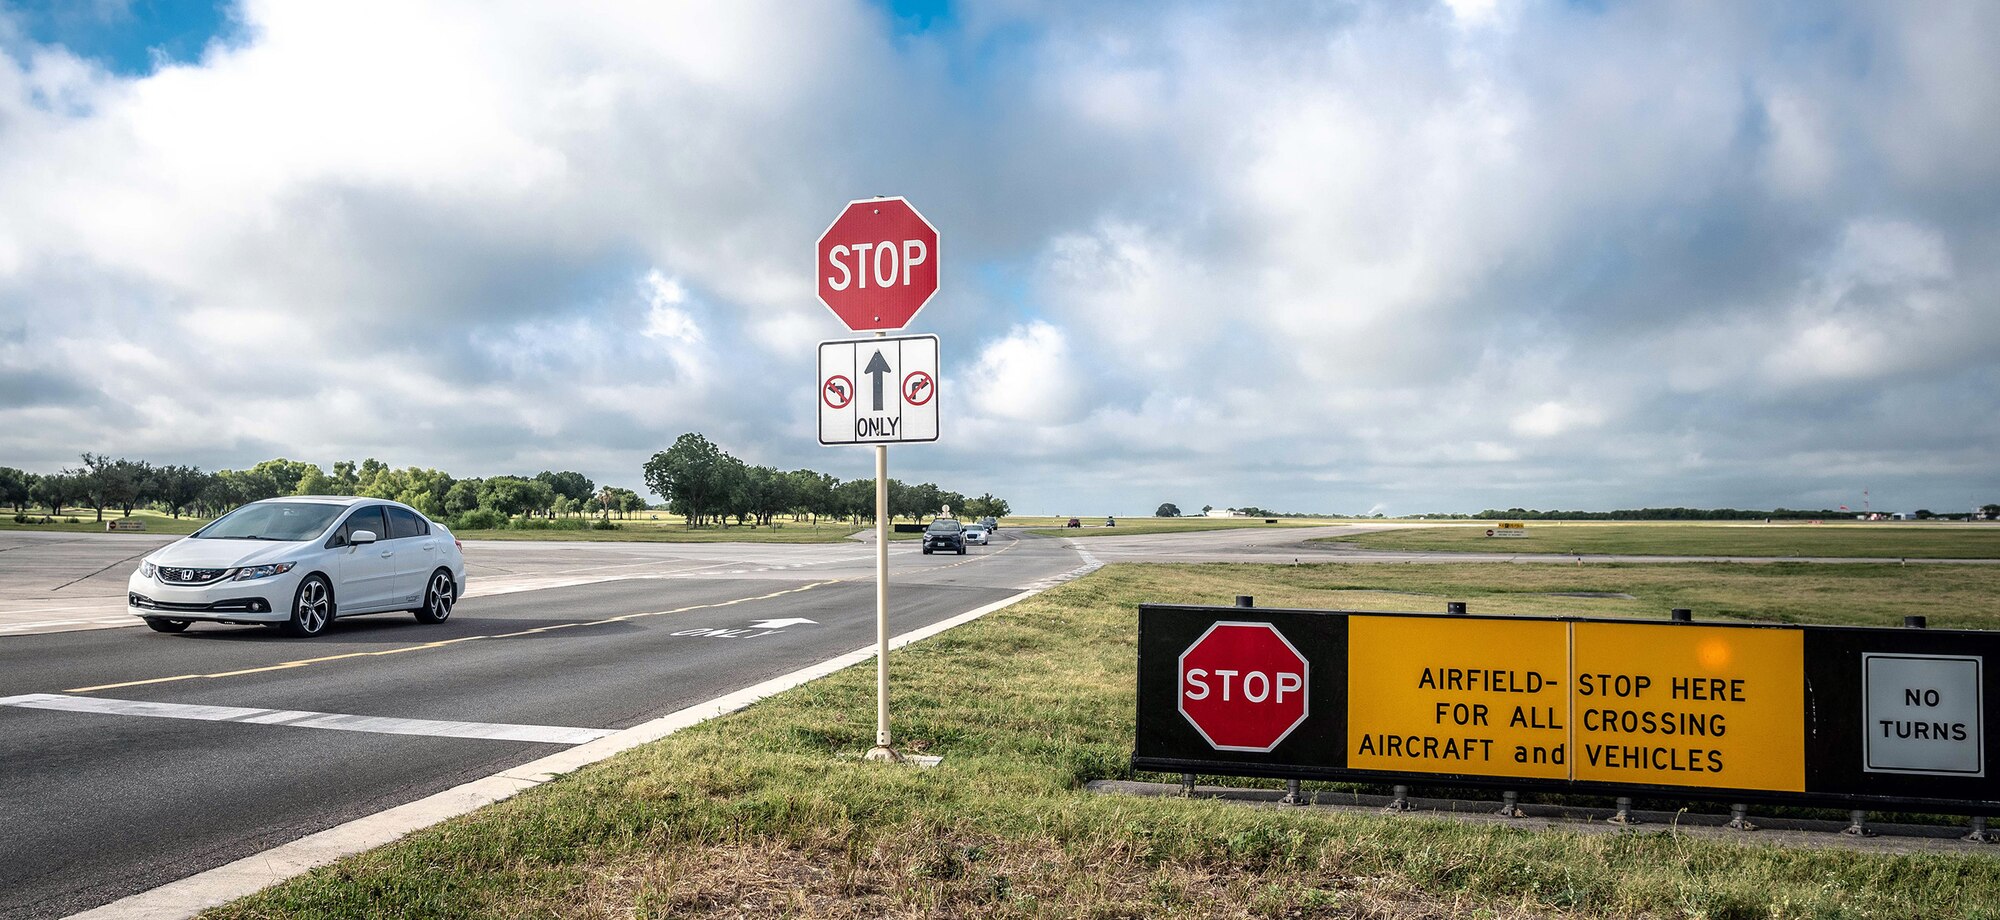 New traffic signage has been erected in support of Operation Echo, a 12th Operations Support Squadron initiative to cut down on illegal flightline entry at the South ramp taxiway at Joint Base San Antonio-Randolph.